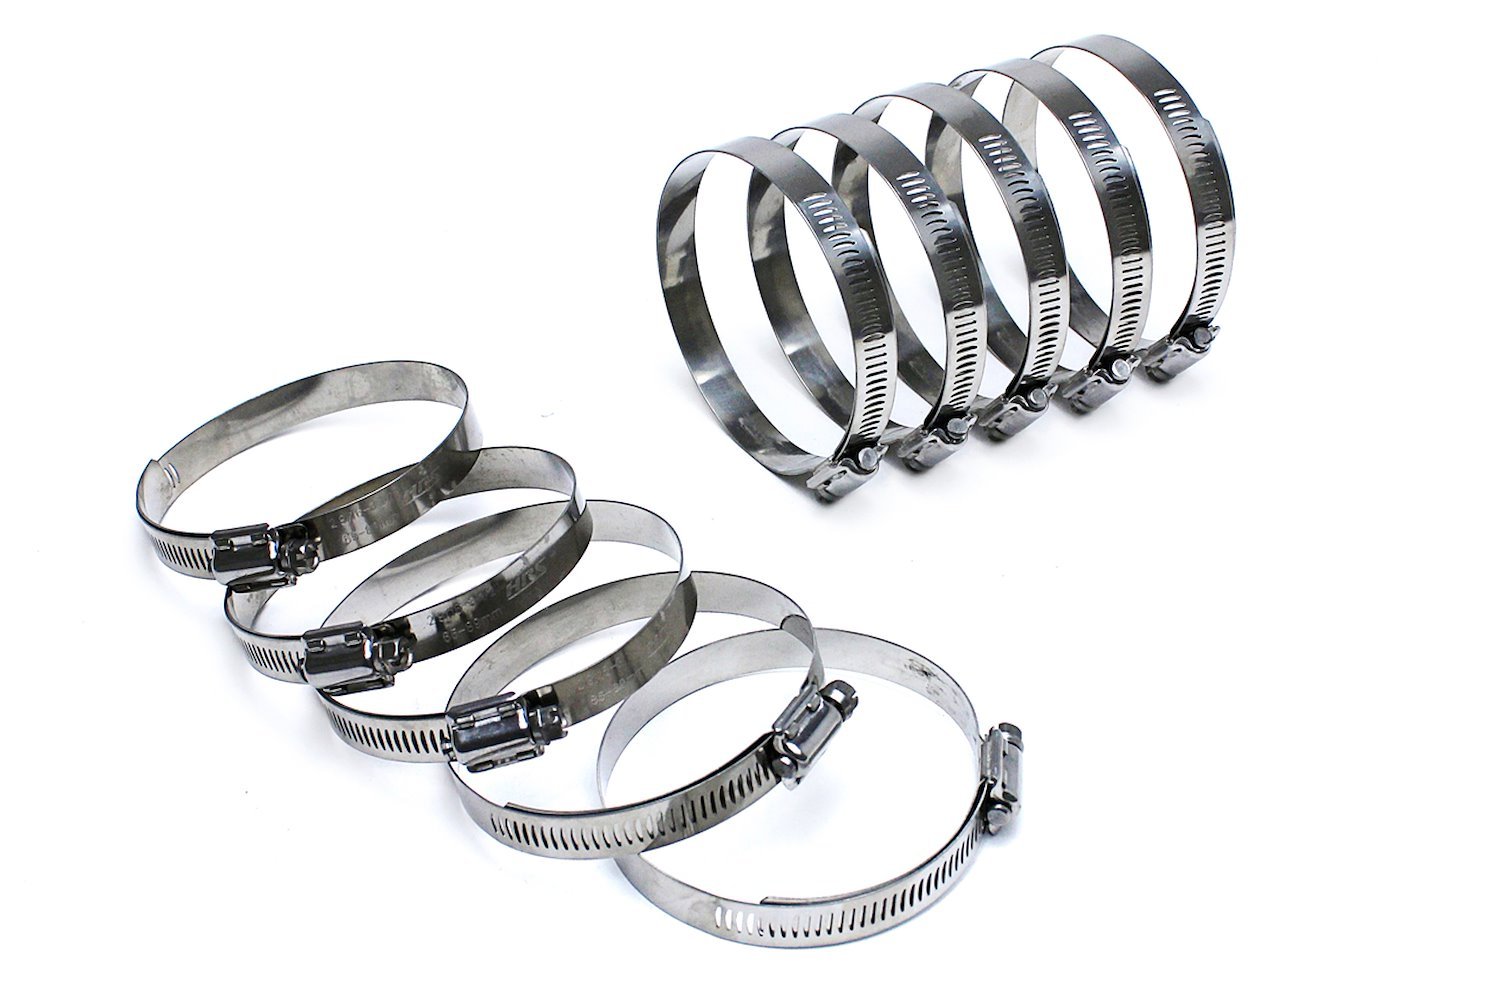 SSWC-40-64x10 Stainless Steel Worm Gear Hose Clamp, Effective Range: 1-9/16 in.- 2-1/2 in., 10Pc